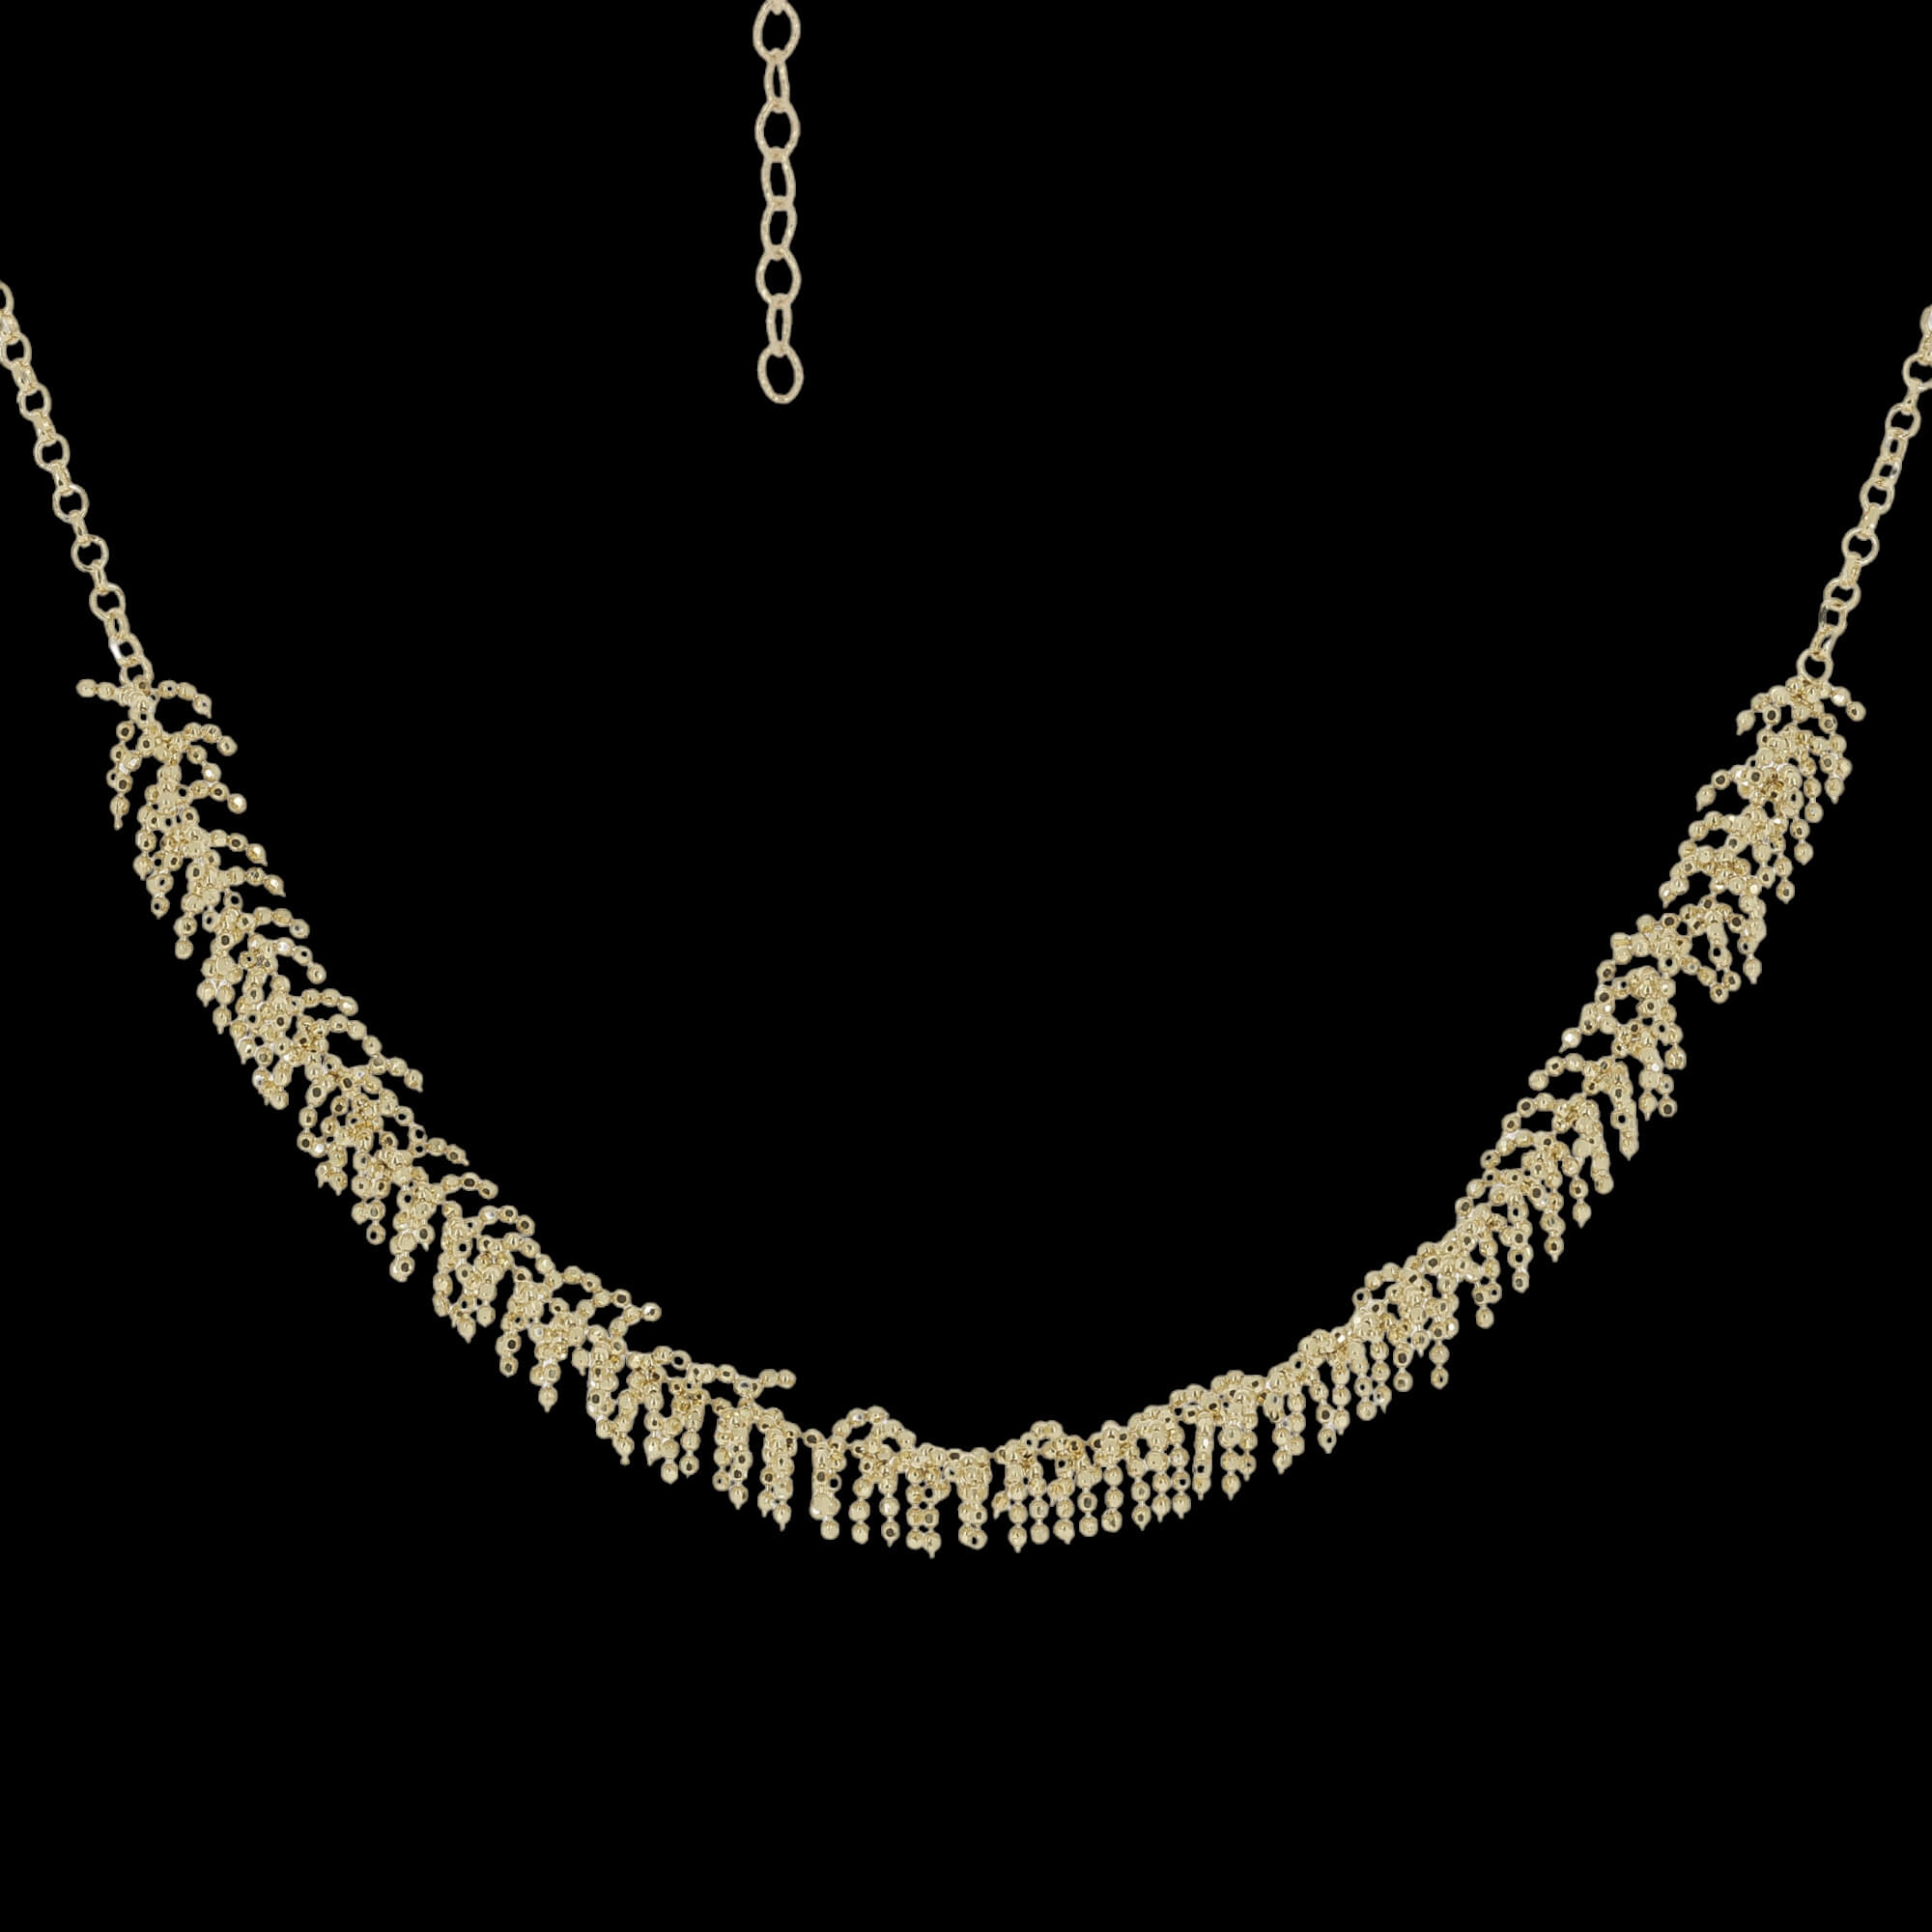 Chic around necklace with refined branches of 18kt gold